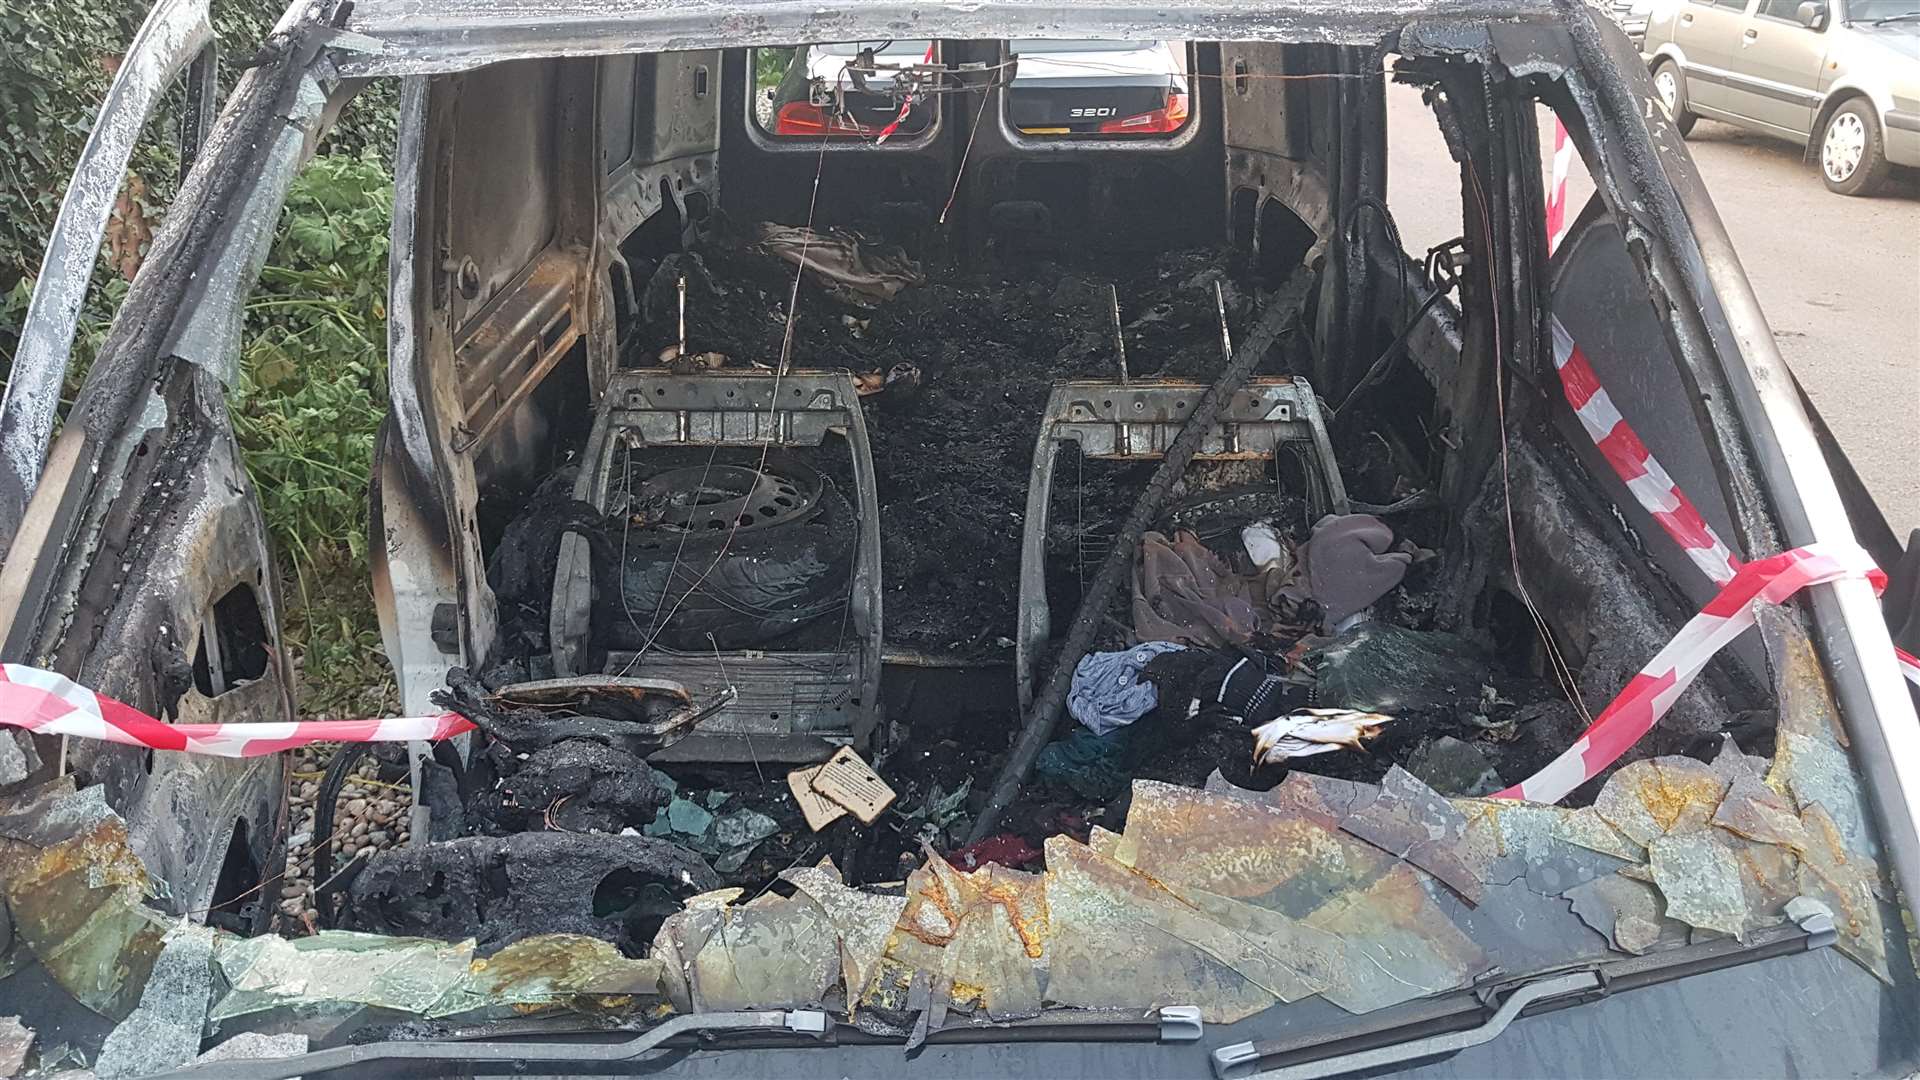 The fire-damaged van in Collingwood Road (6318042)